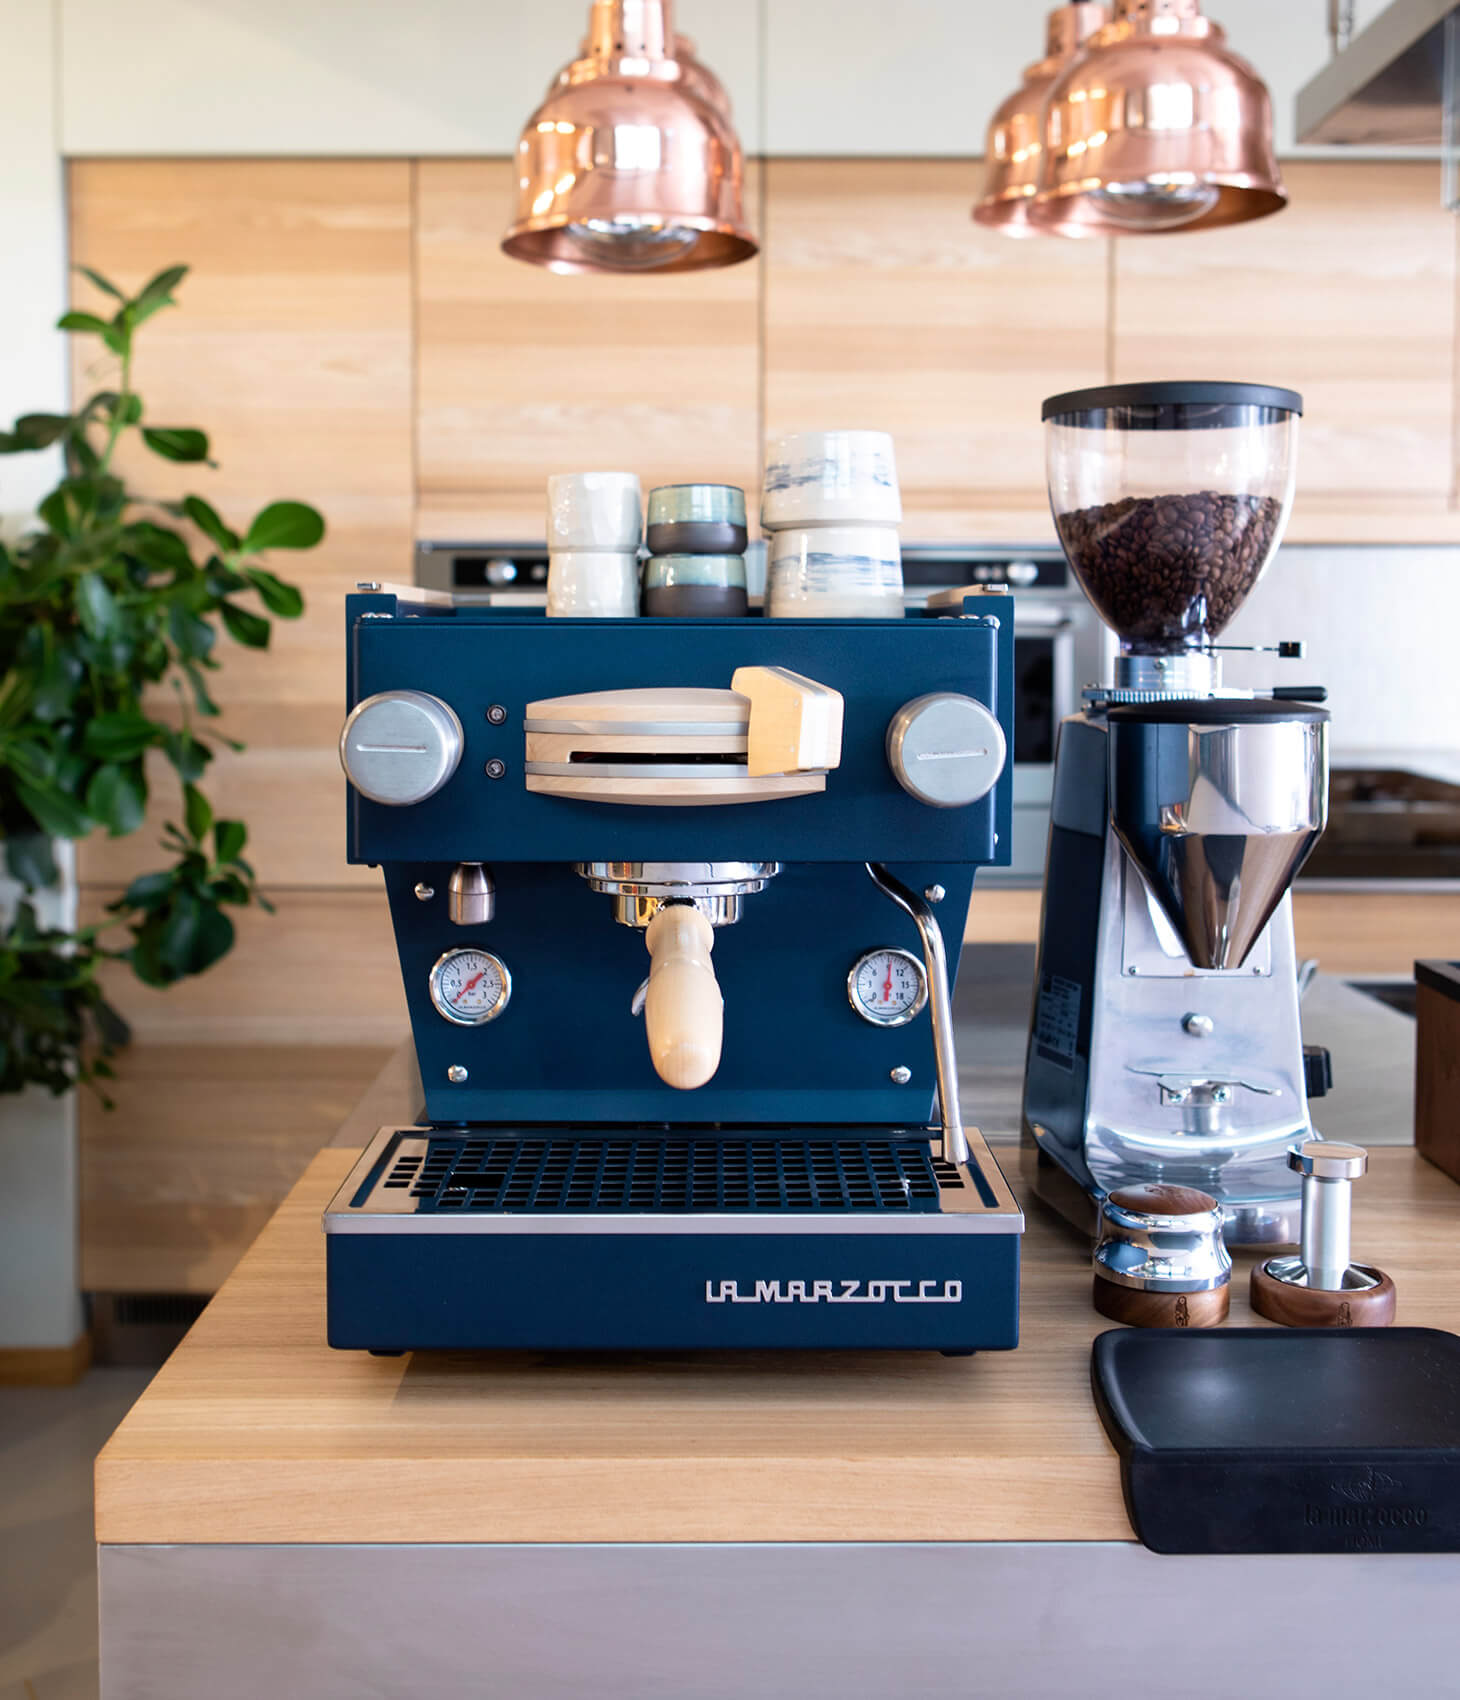 Nordic Linea Mini with navy blue panels and maple details on wooden counter top next to a Mazzer Lux D grinder